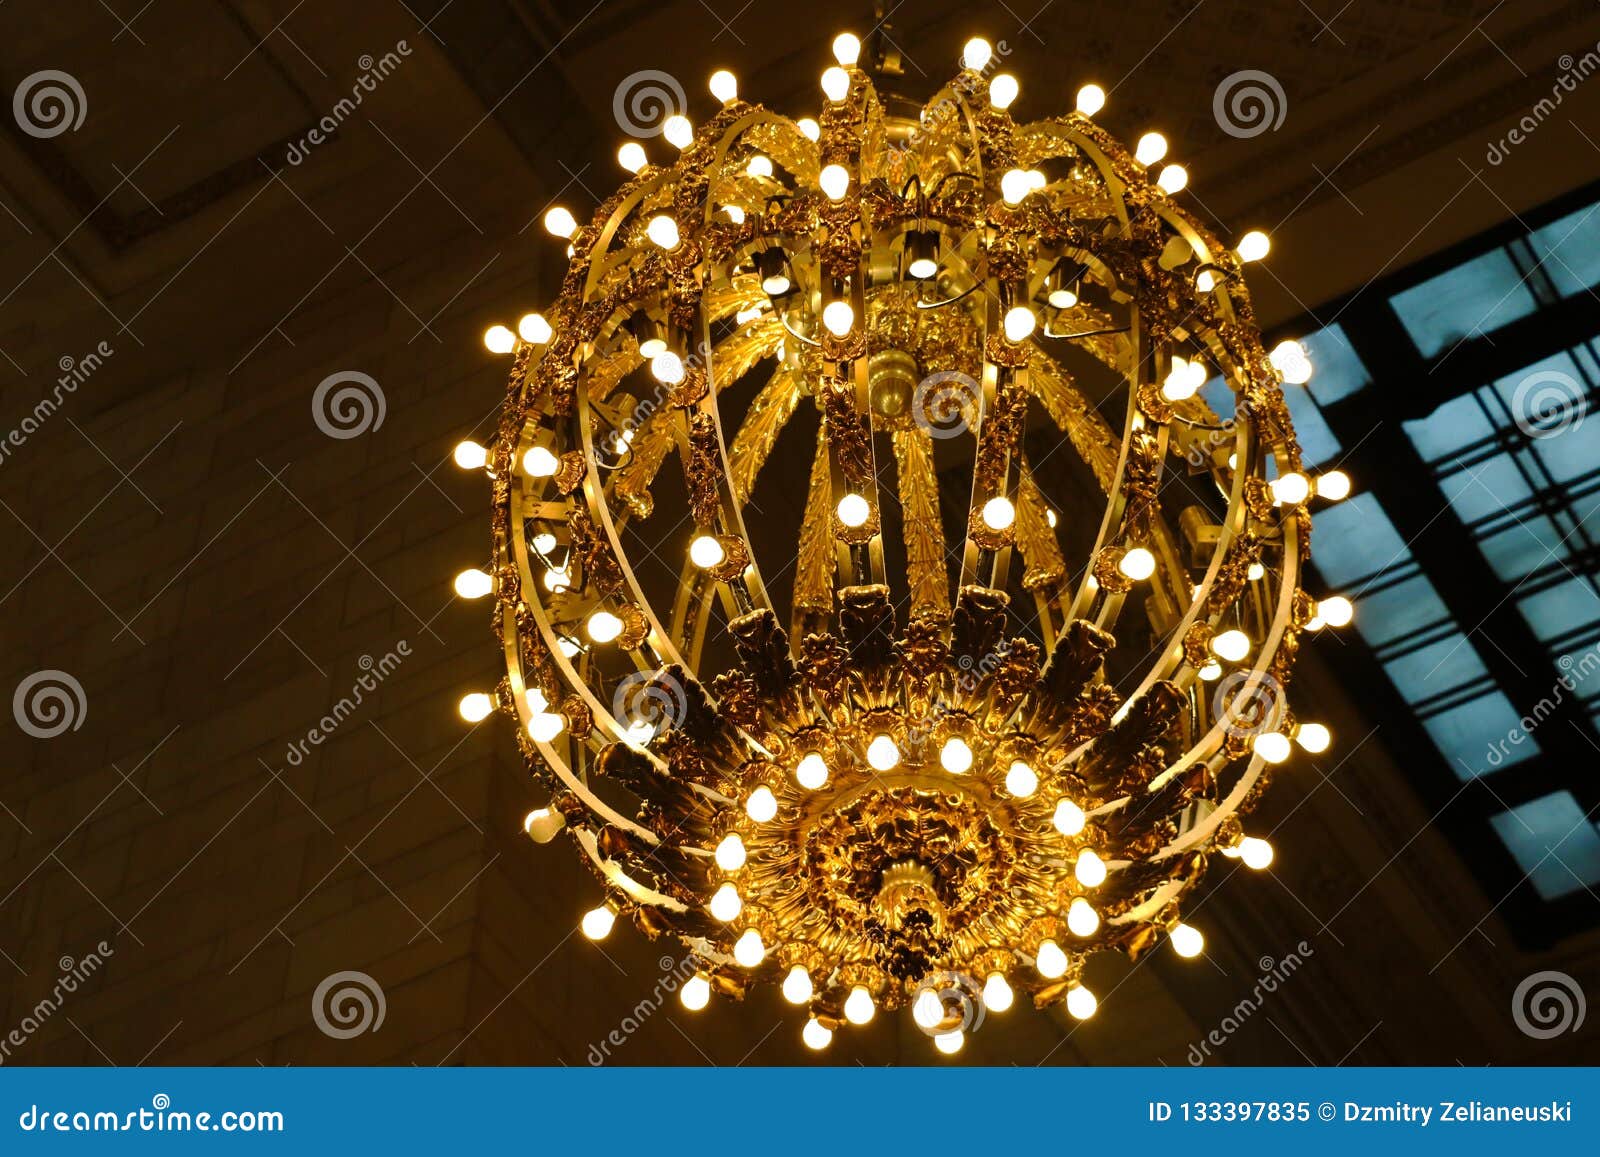 New York August 26 2018 Chandelier On The Ceiling Of